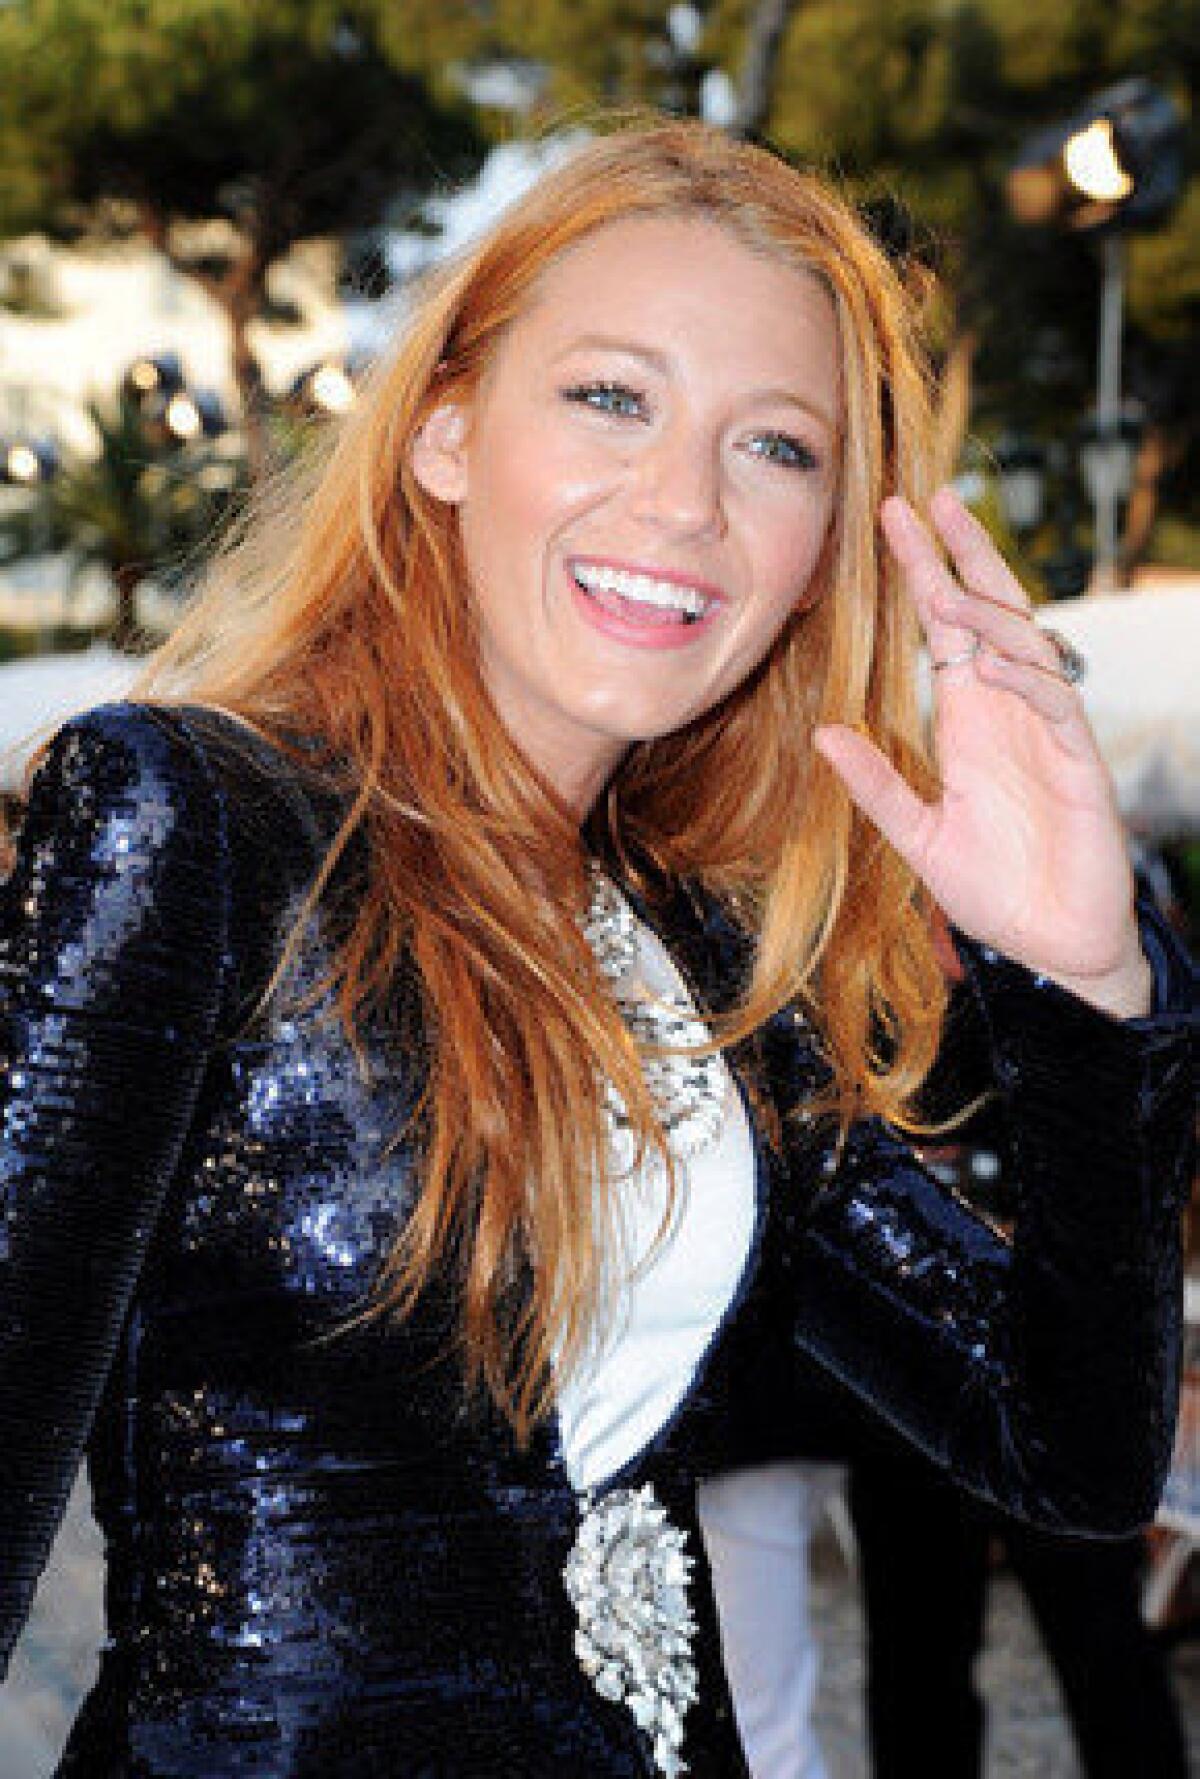 Blake Lively attends the Chanel Collection Croisiere Show in Cap d'Antibes, France.